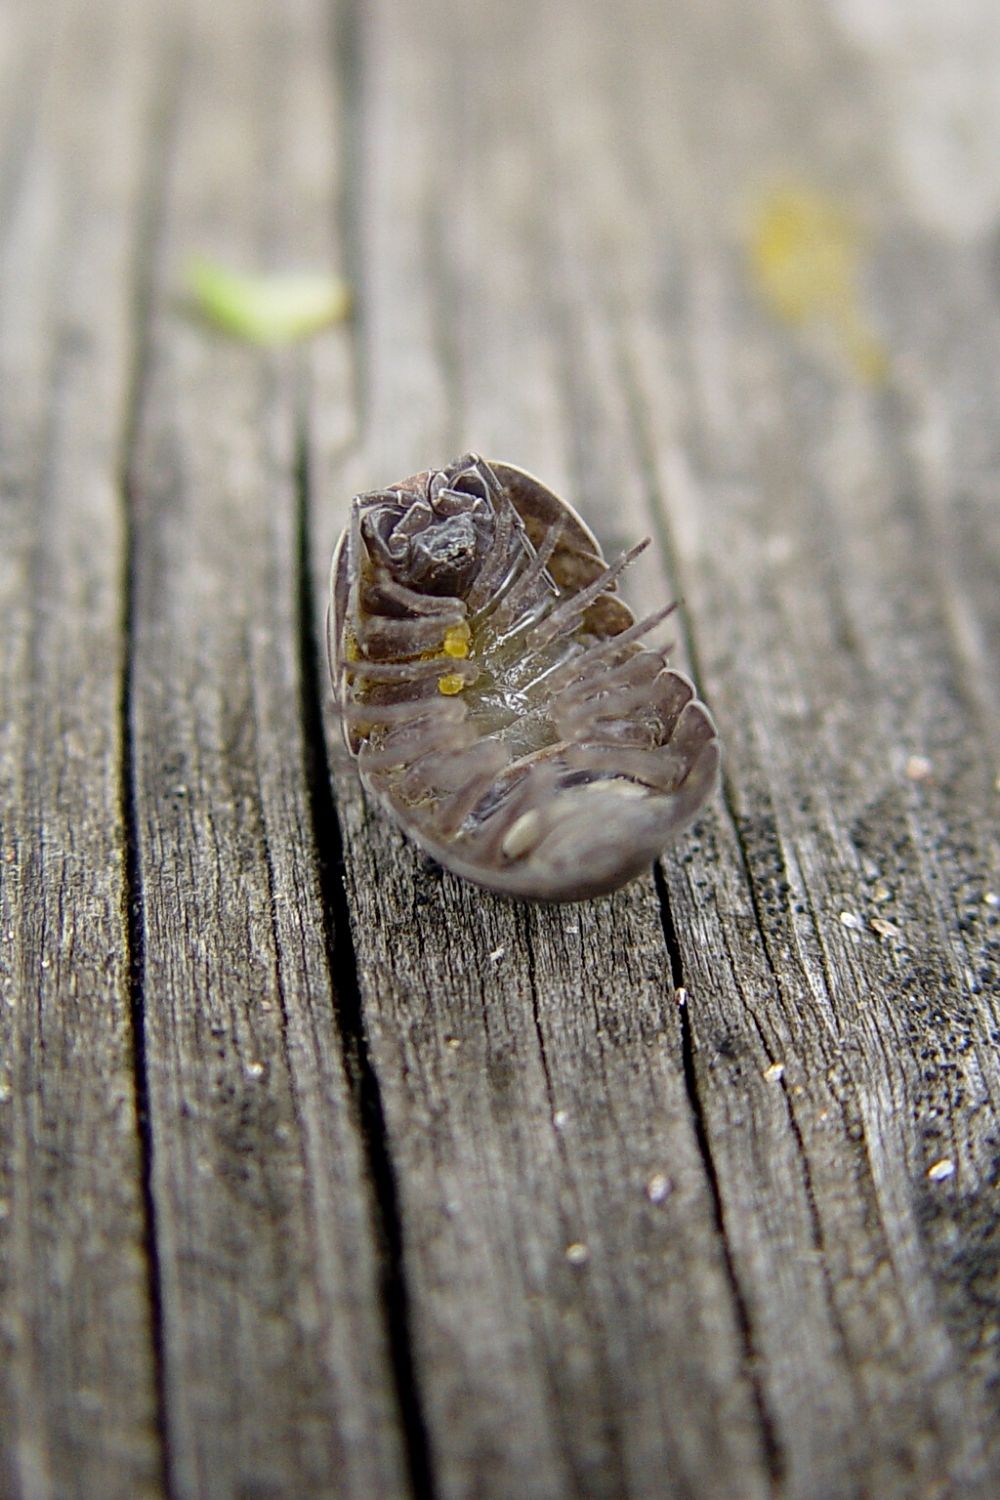 Zebra isopods will curl up into a ball when they sense danger, similar to other isopod species